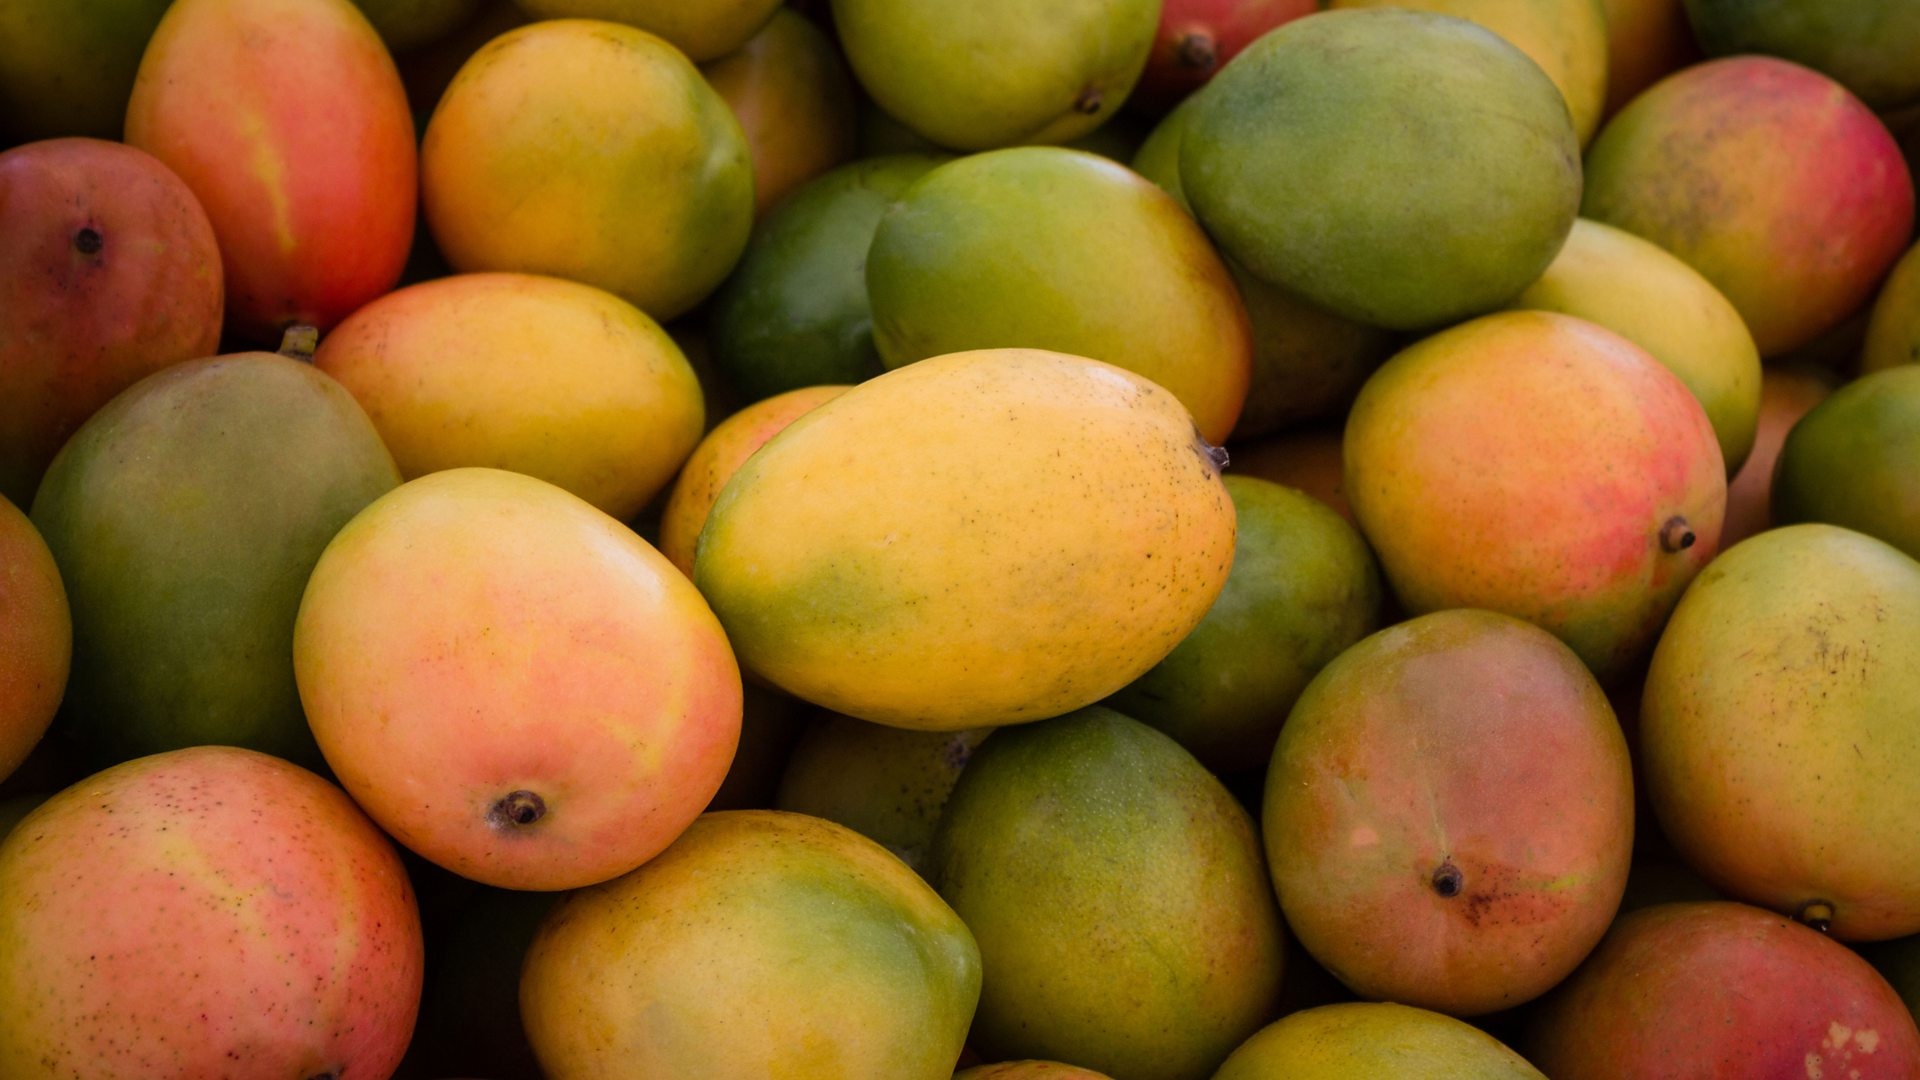 Mango: Harvested while they are green but perfectly matured on the tree. 1920x1080 Full HD Background.